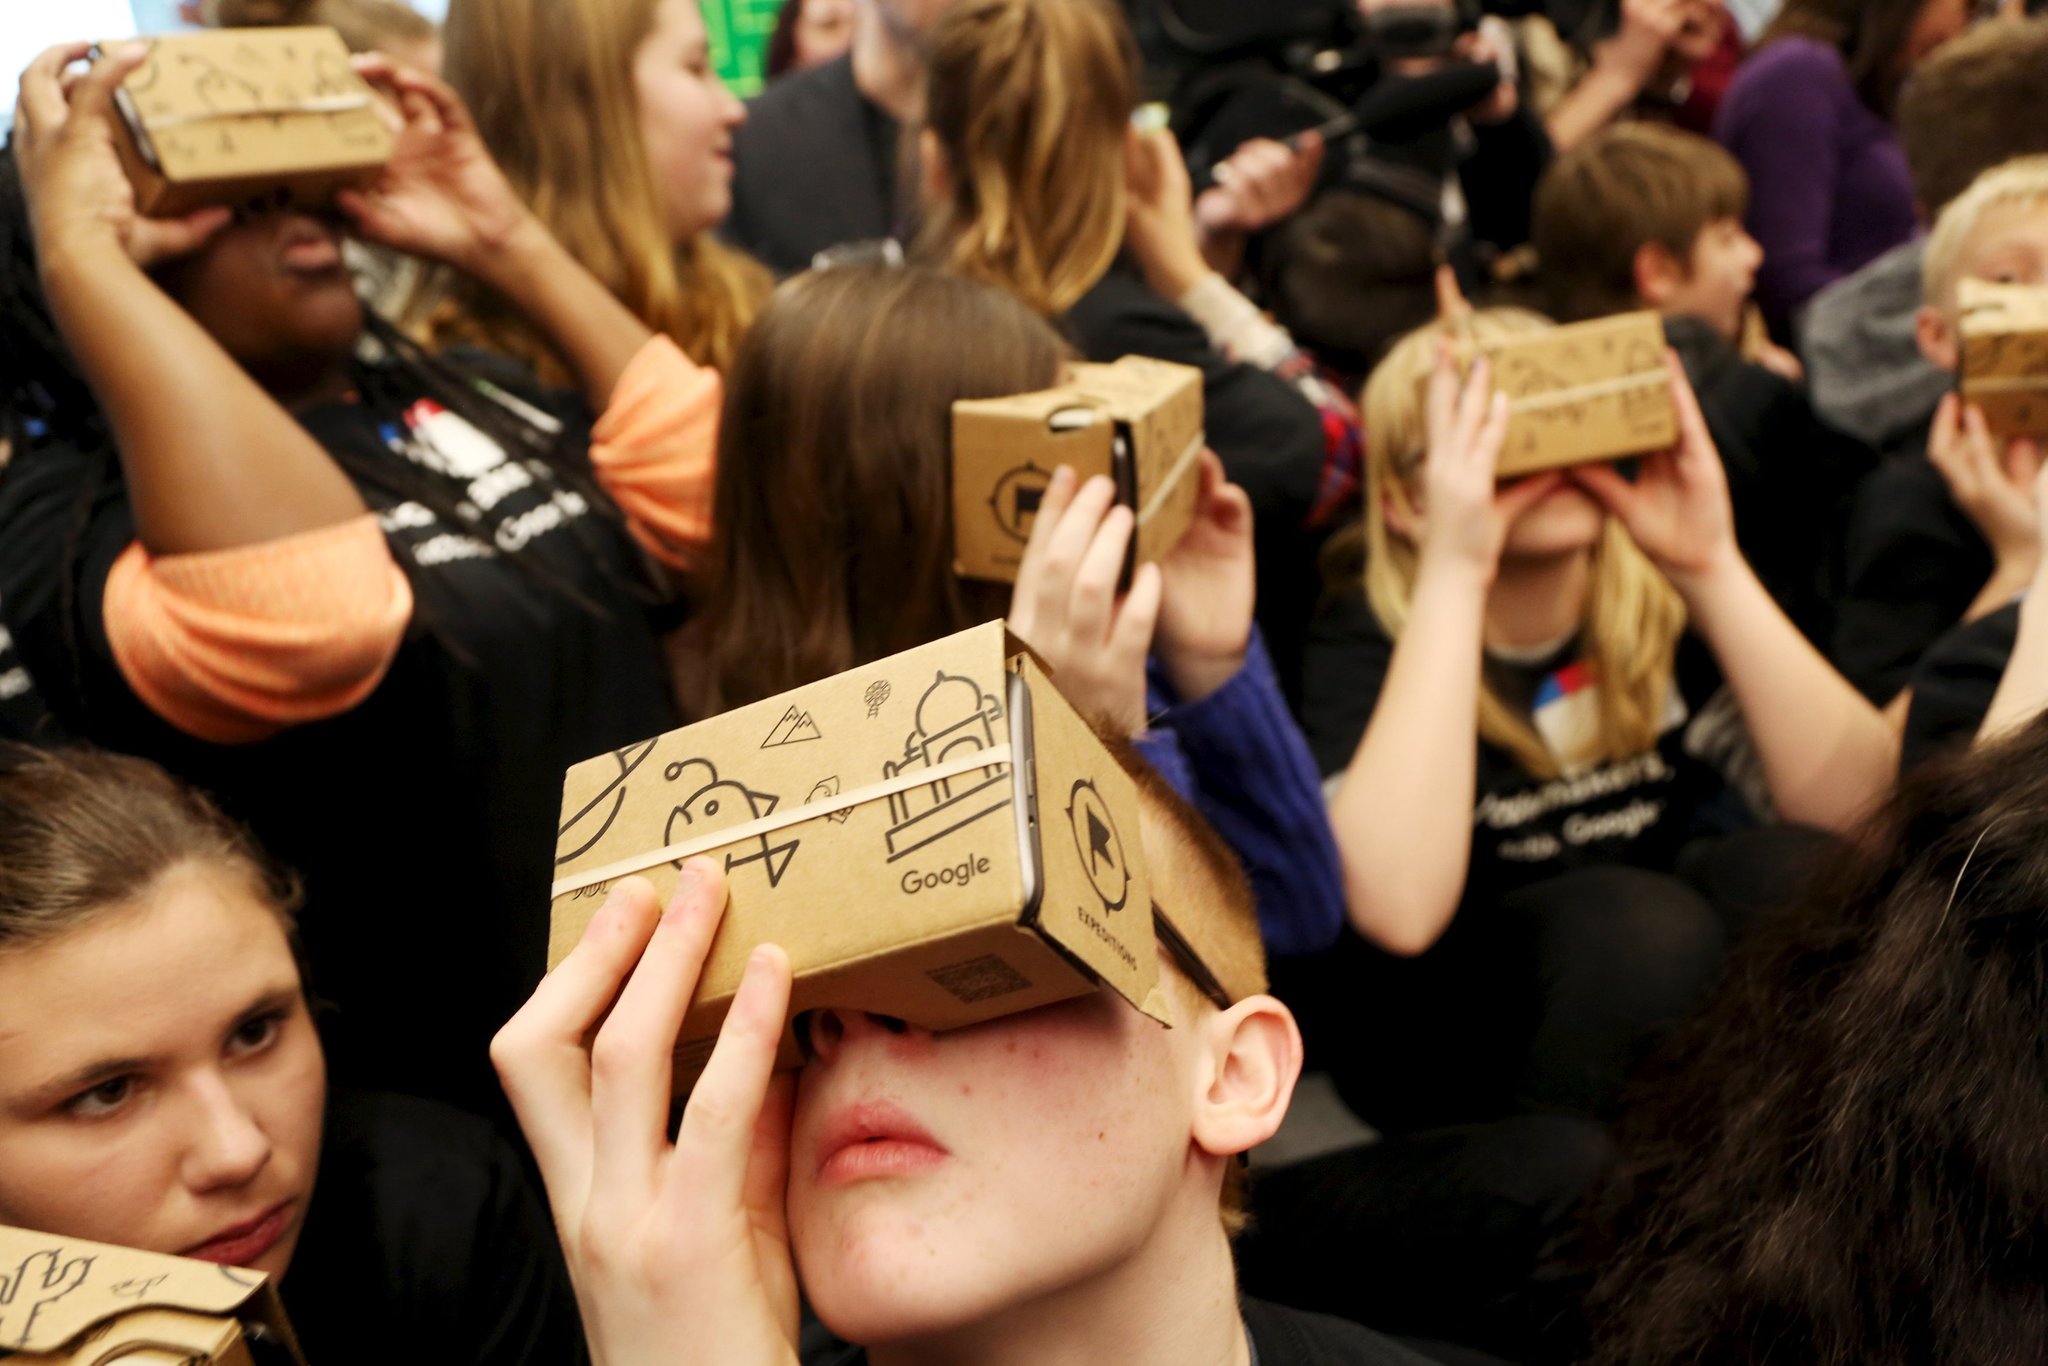 Students used Google Cardboard virtual reality viewers to “tour” Canada’s Parliament at an event in January, 2015. Photo: Reuters